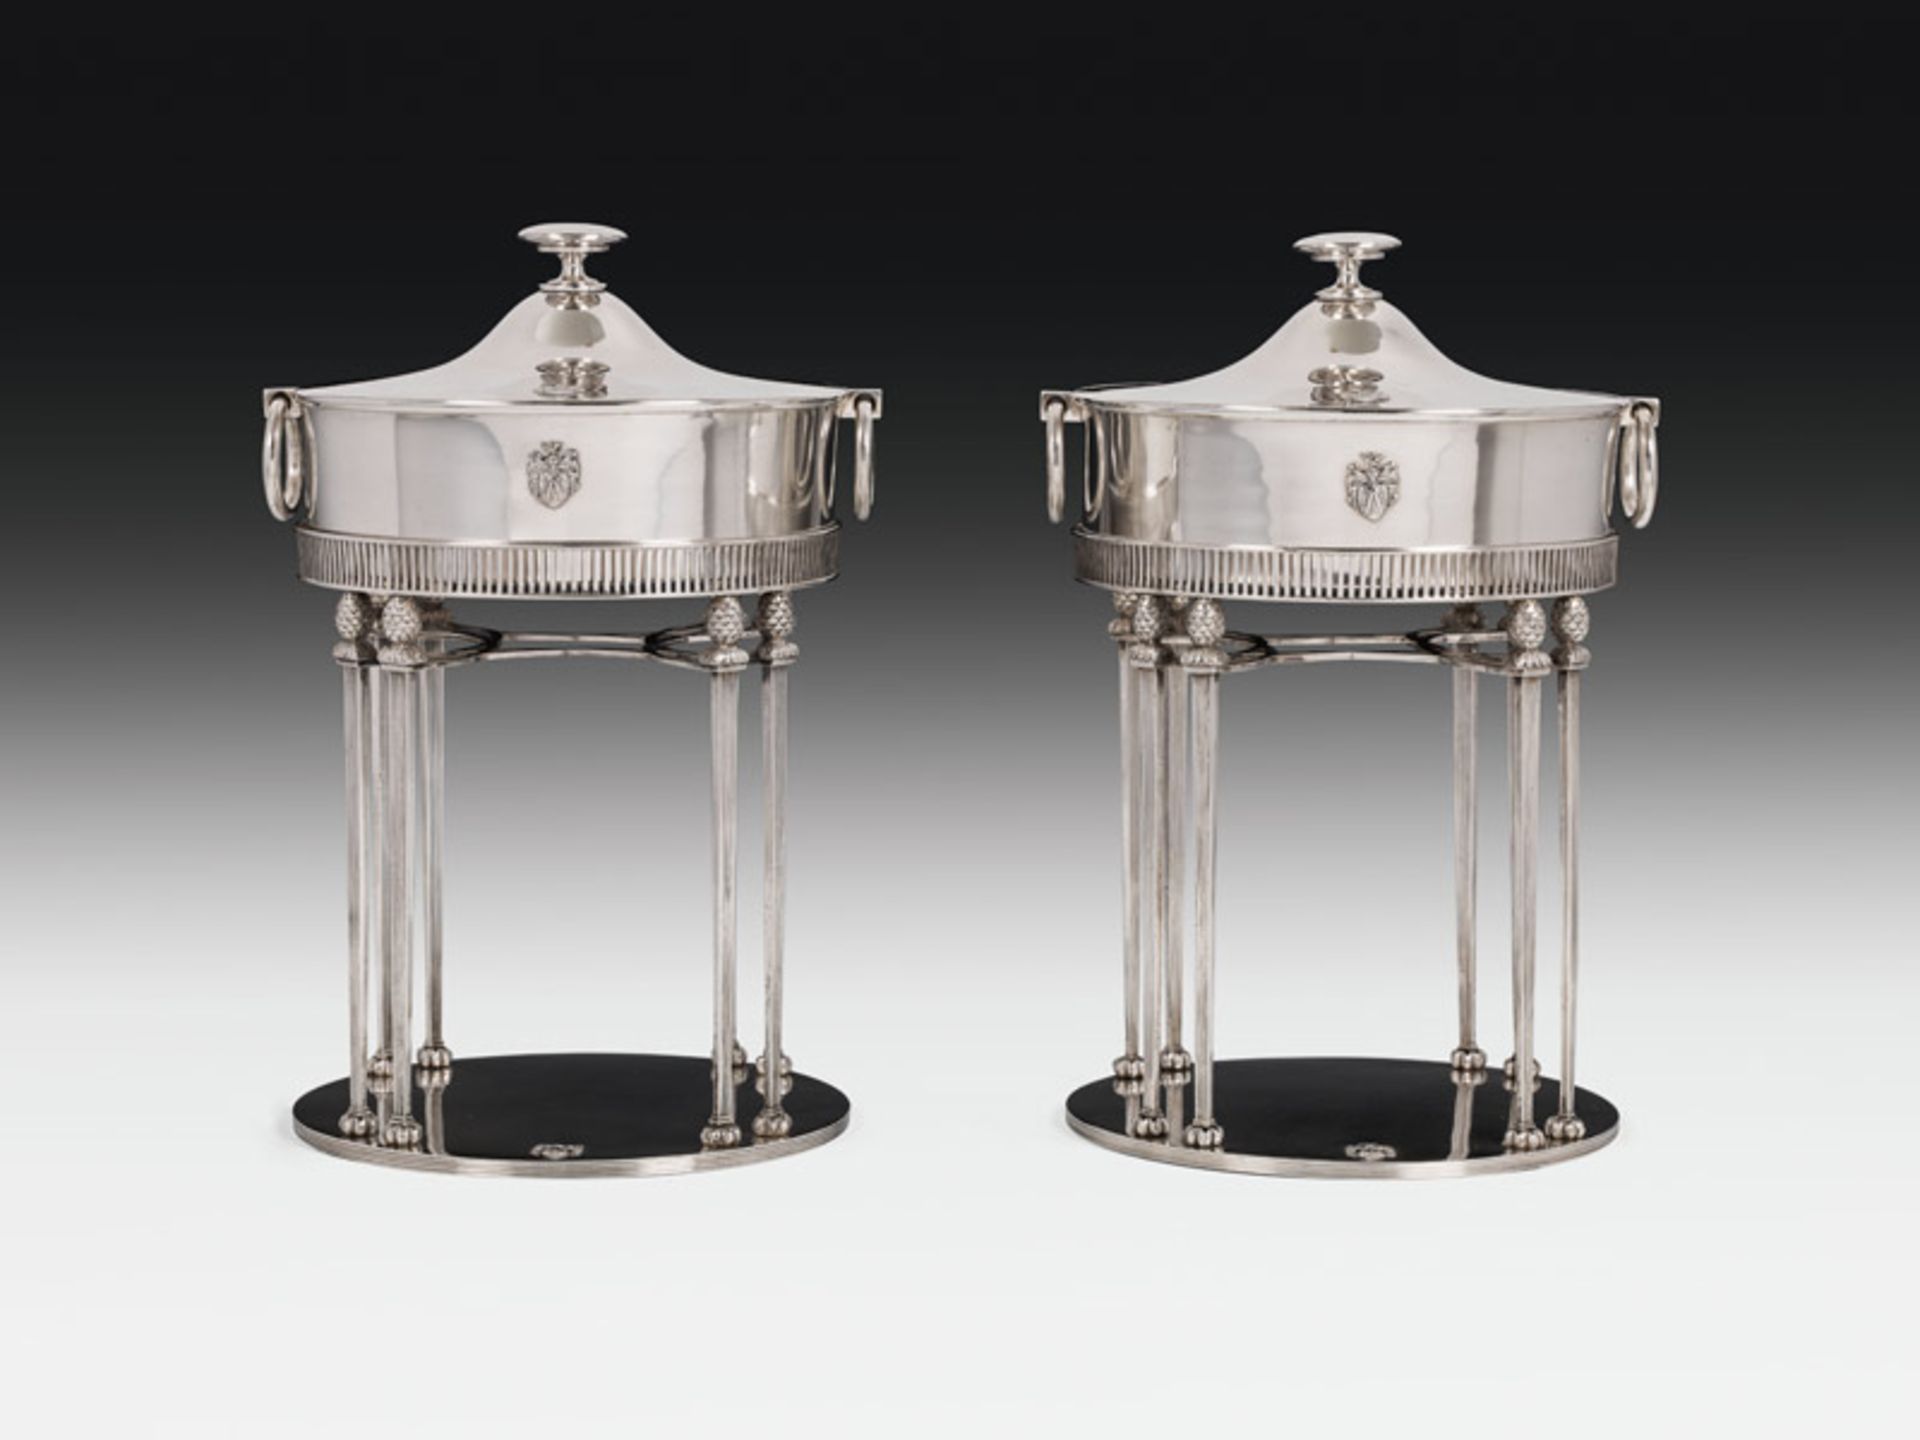 Pair of terrines formerly owned by count Almásy of Zsadany and Török, Vienna, 1807